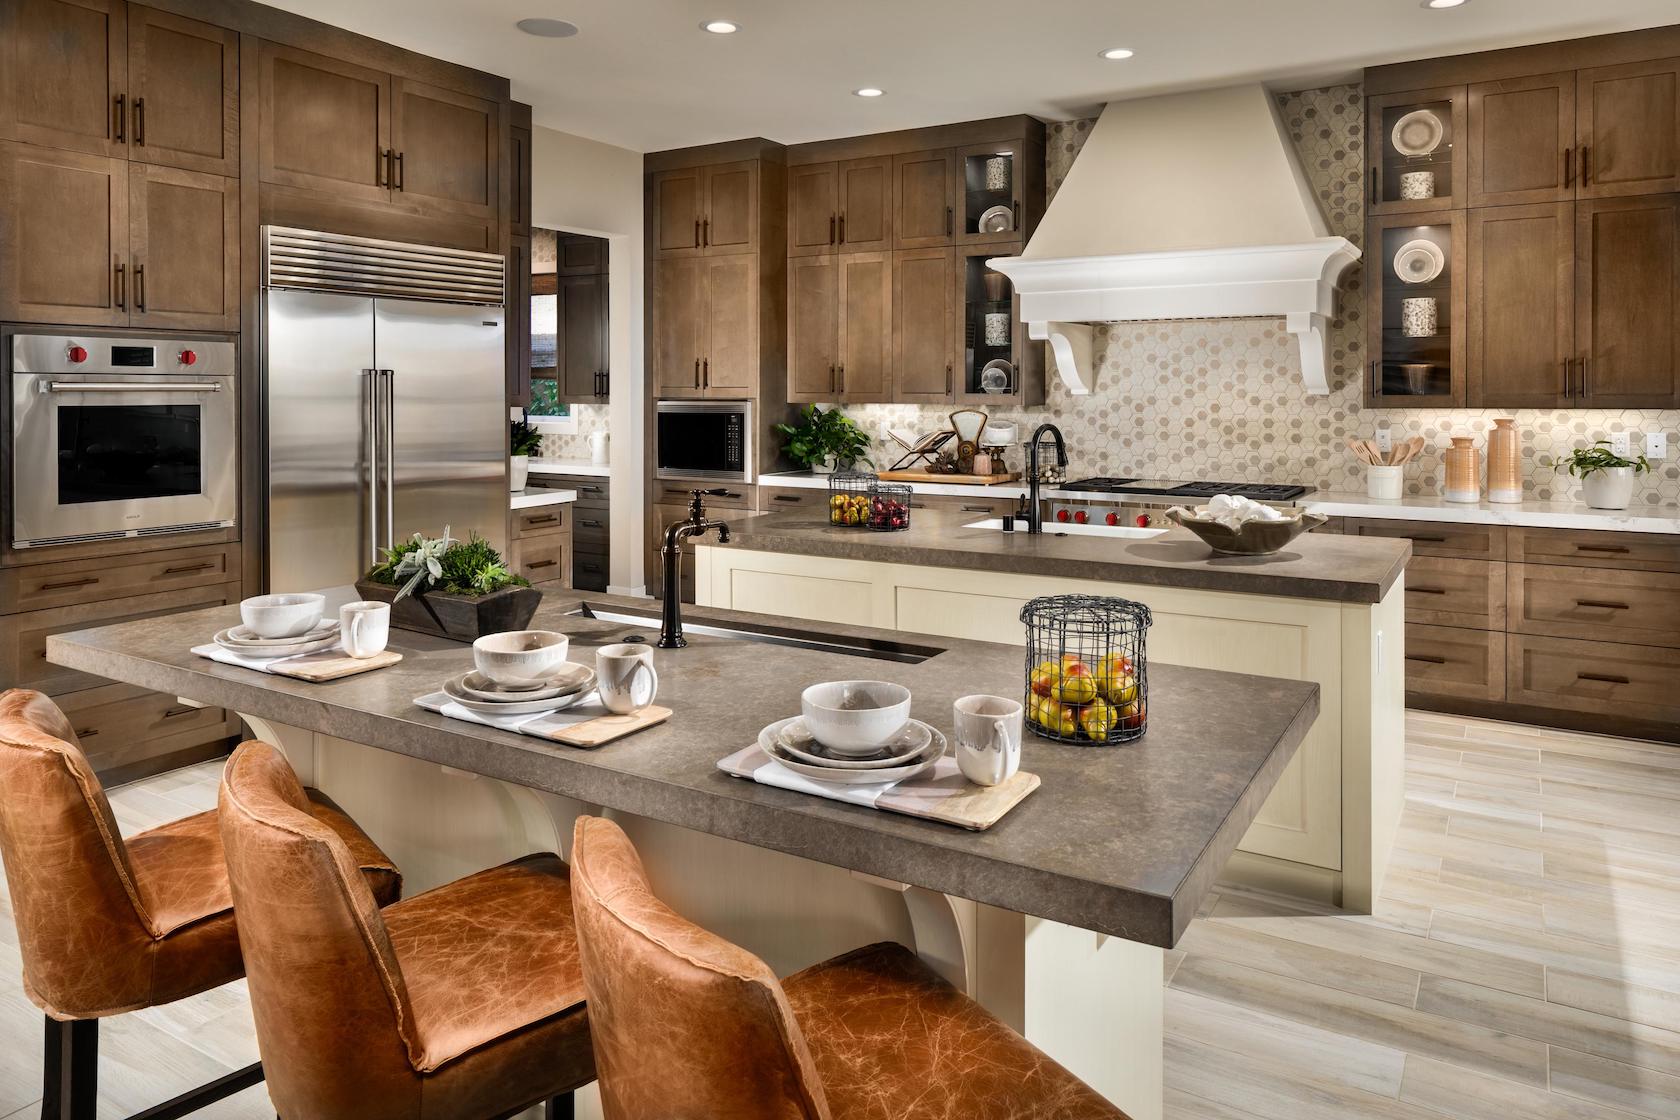 5 double island kitchen ideas for your custom home